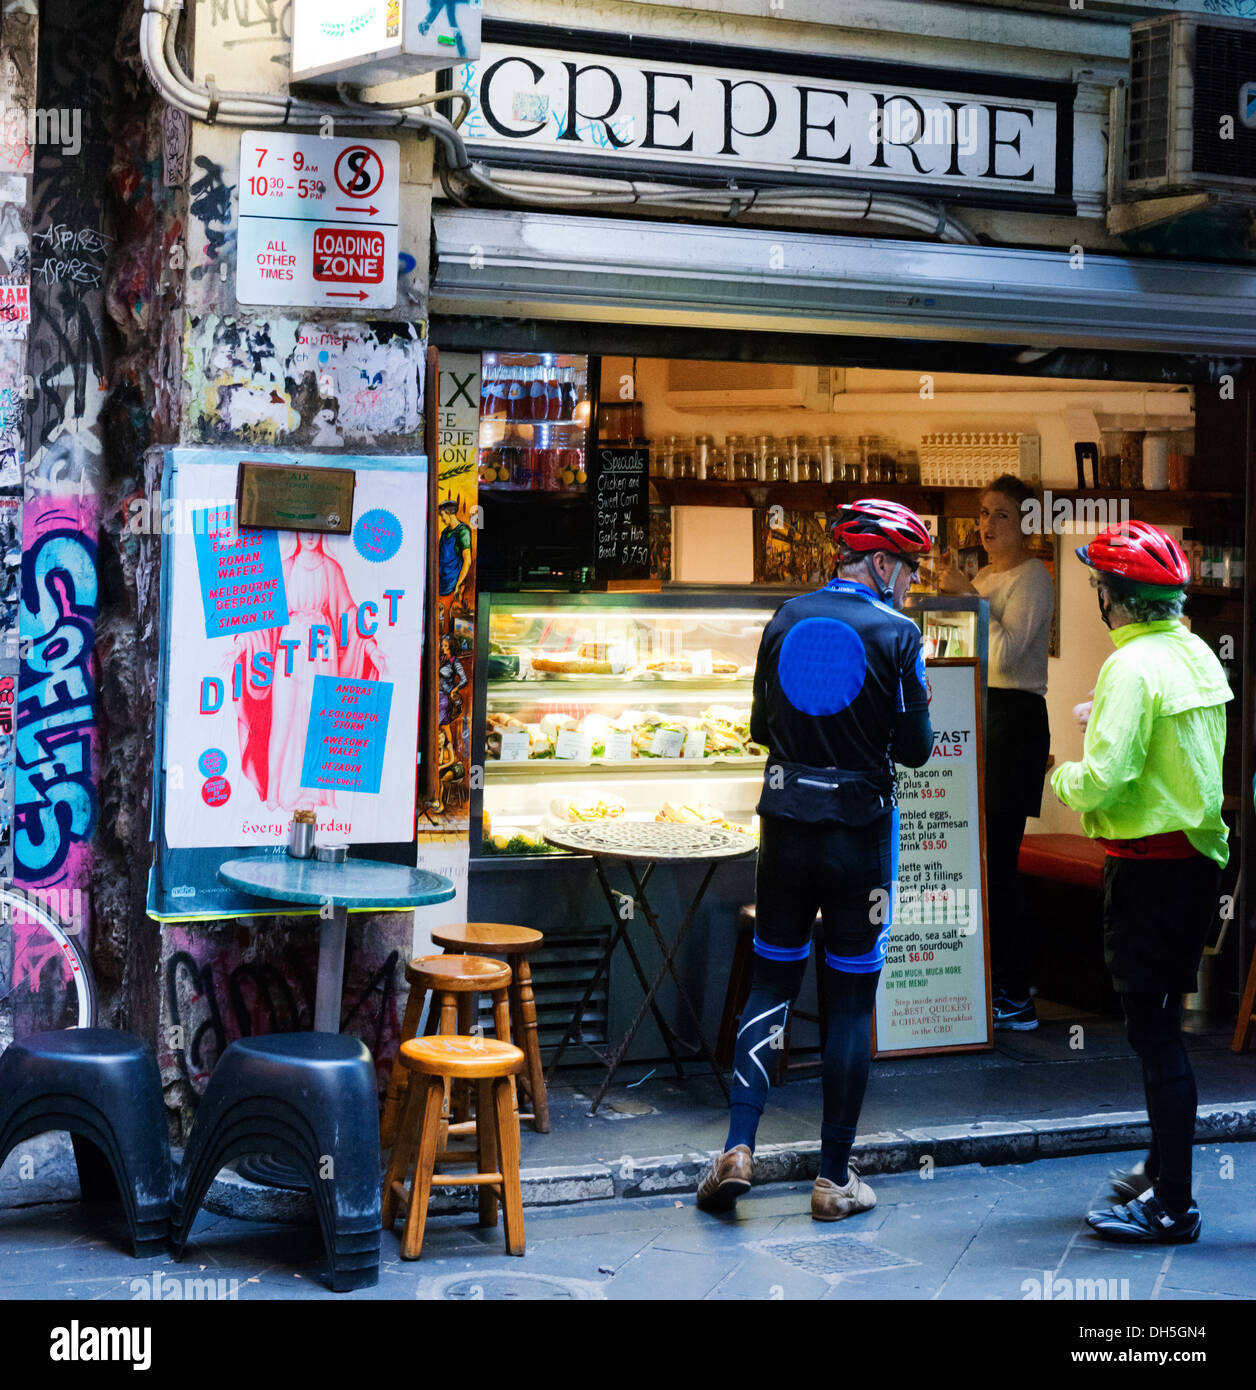 Cyclists line up for a crepe at a Creperie in one of Melbourne's famed lanes. Stock Photo